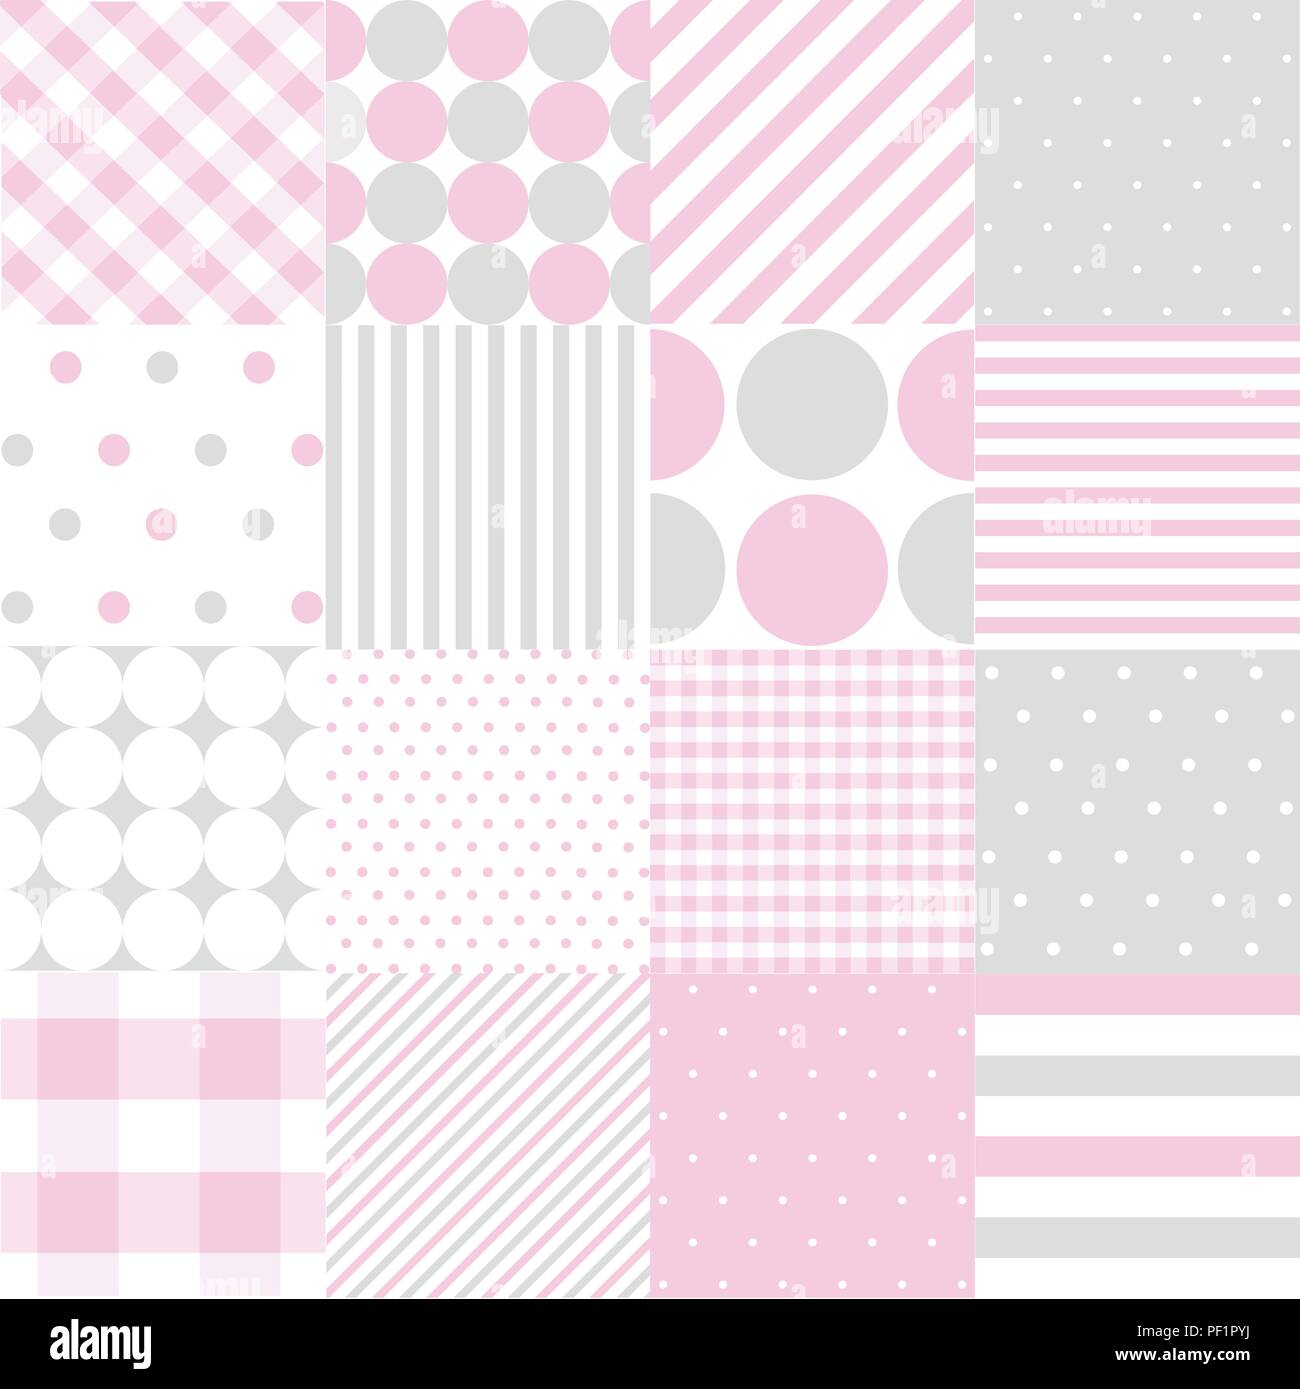 Seamless Patterns For Baby Girl Shower Party Set Of Cute Pink Backgrounds For Invitation Templates Scrapbook Cards Stock Vector Image Art Alamy Pink wallpapers download hd beautiful cool high quality pink background wallpaper images collection for your mobile phone. https www alamy com seamless patterns for baby girl shower party set of cute pink backgrounds for invitation templates scrapbook cards image215784230 html